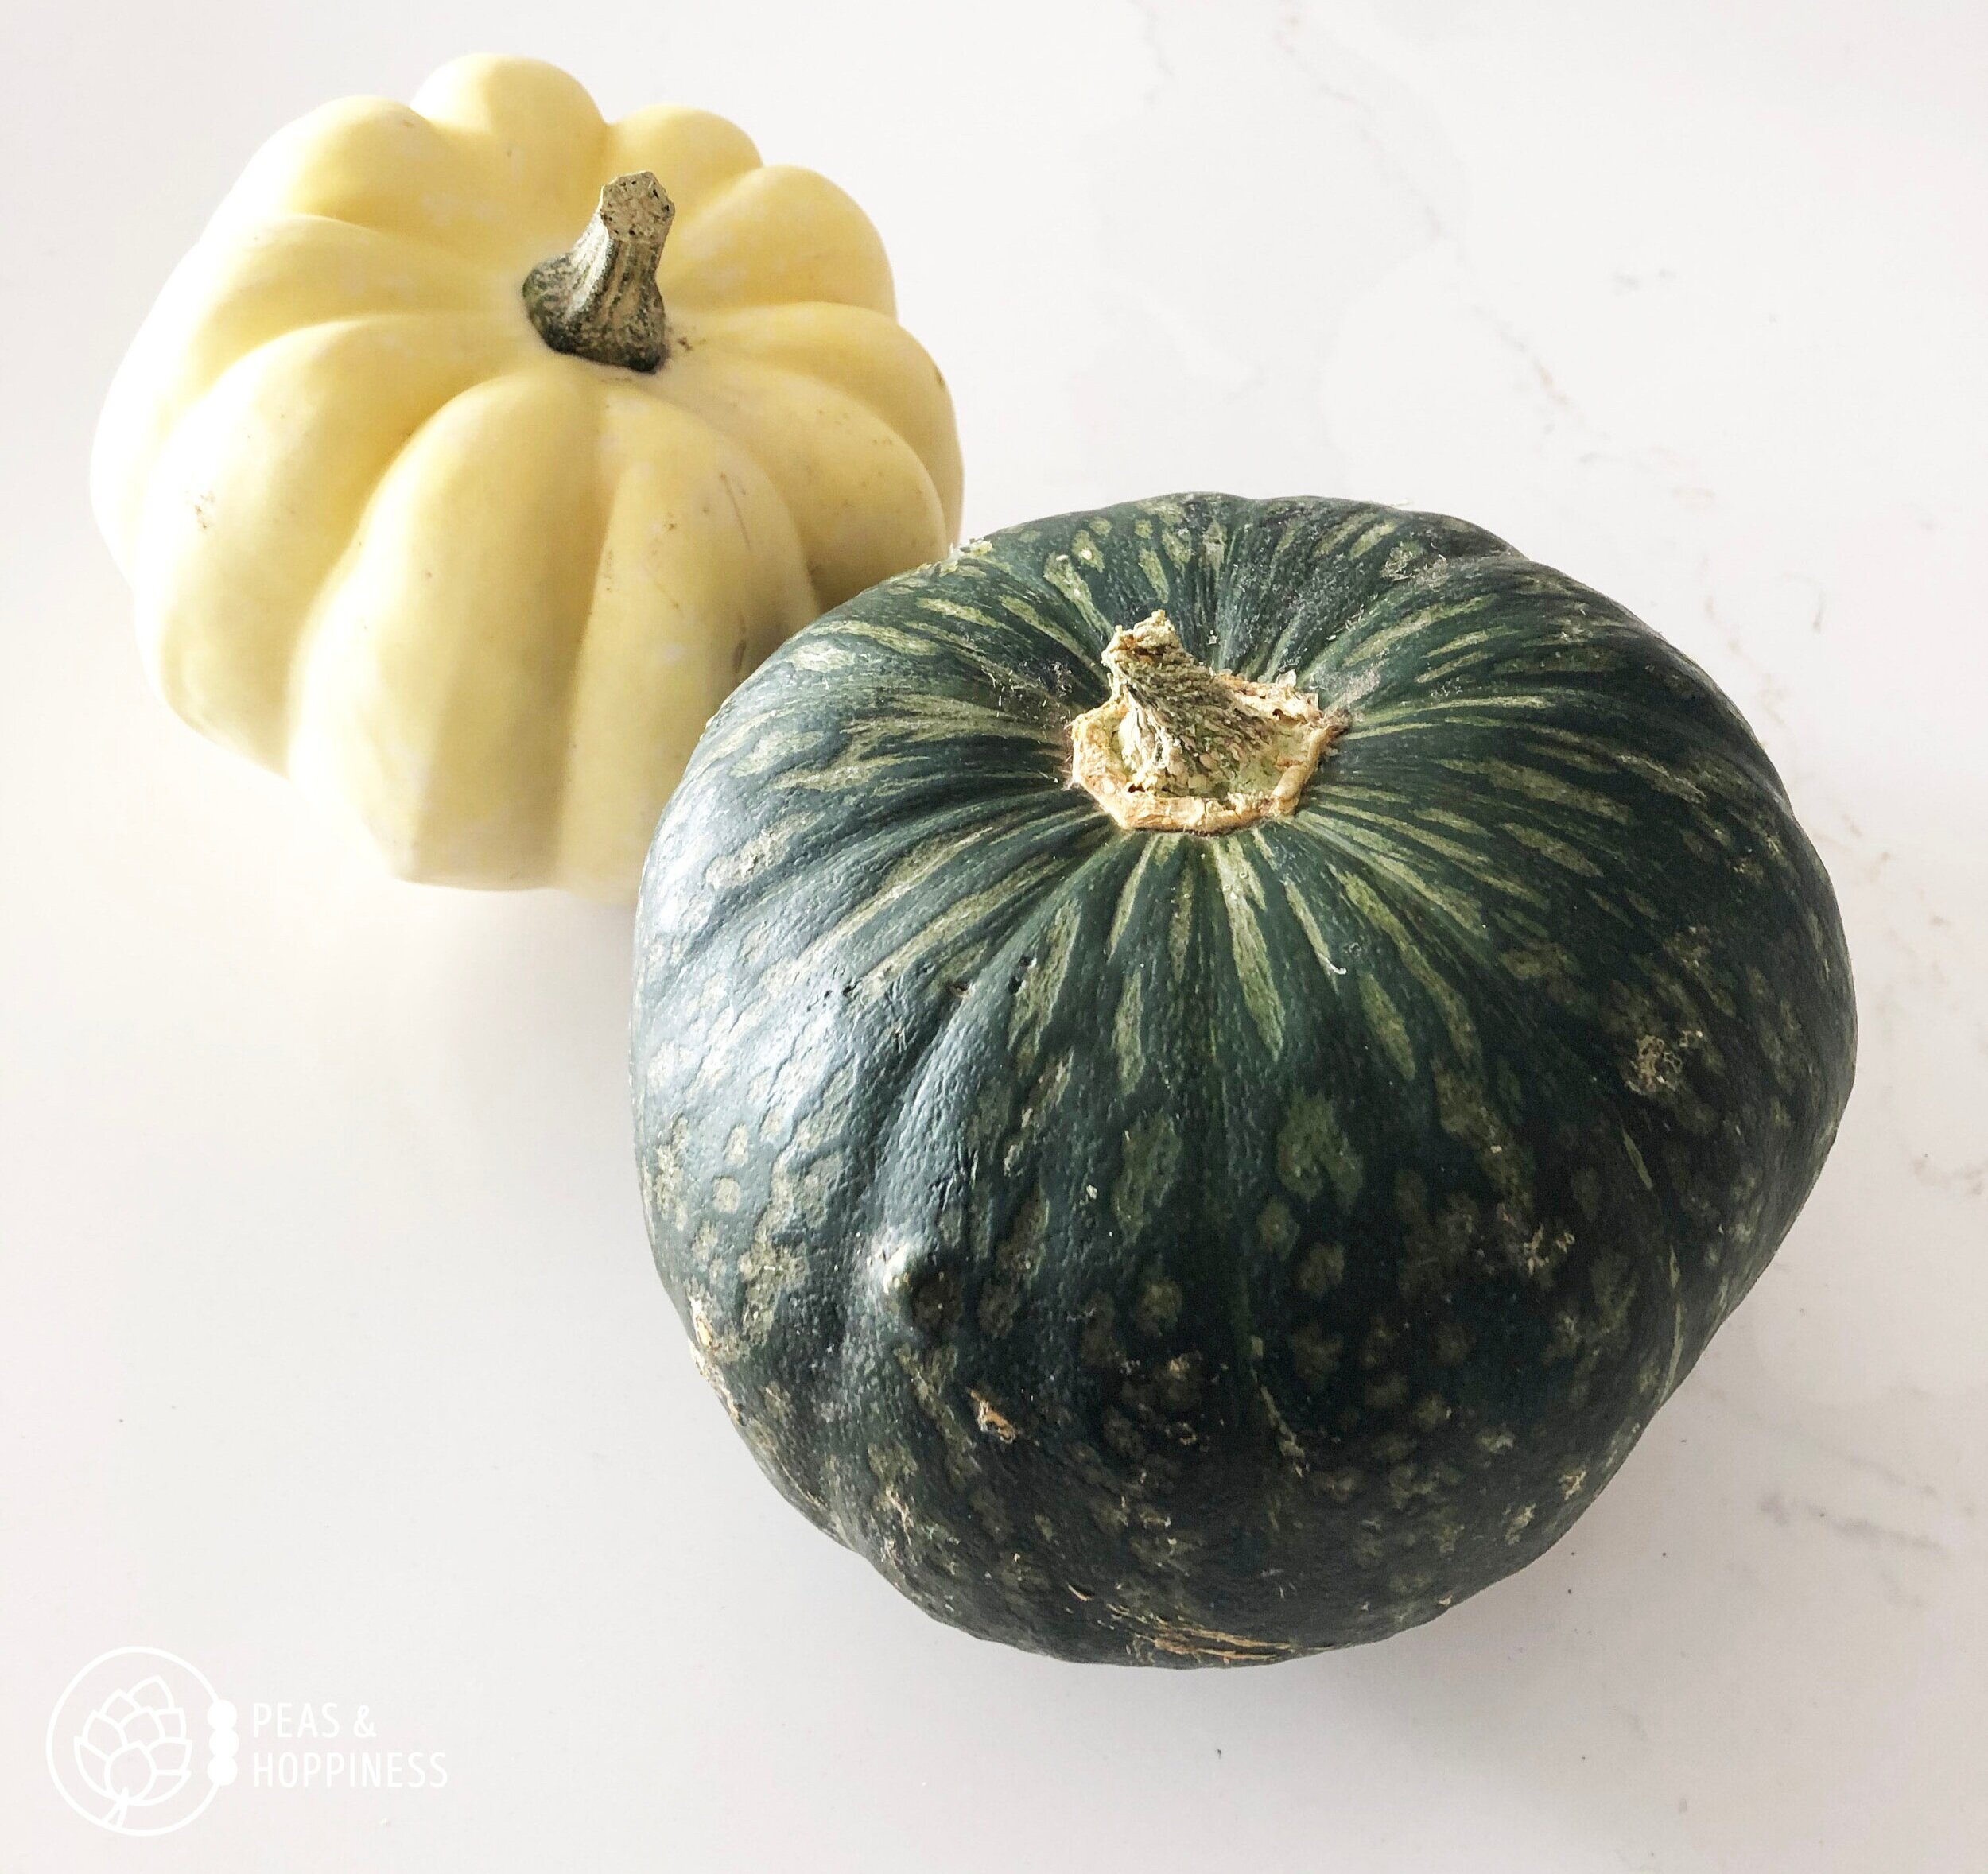 To watch a demonstration of how I go about cooking a vegetable I’ve never seen before, watch this example using a Buttercup Squash - the strange new veggie I received in my Miller Farms CSA last week!